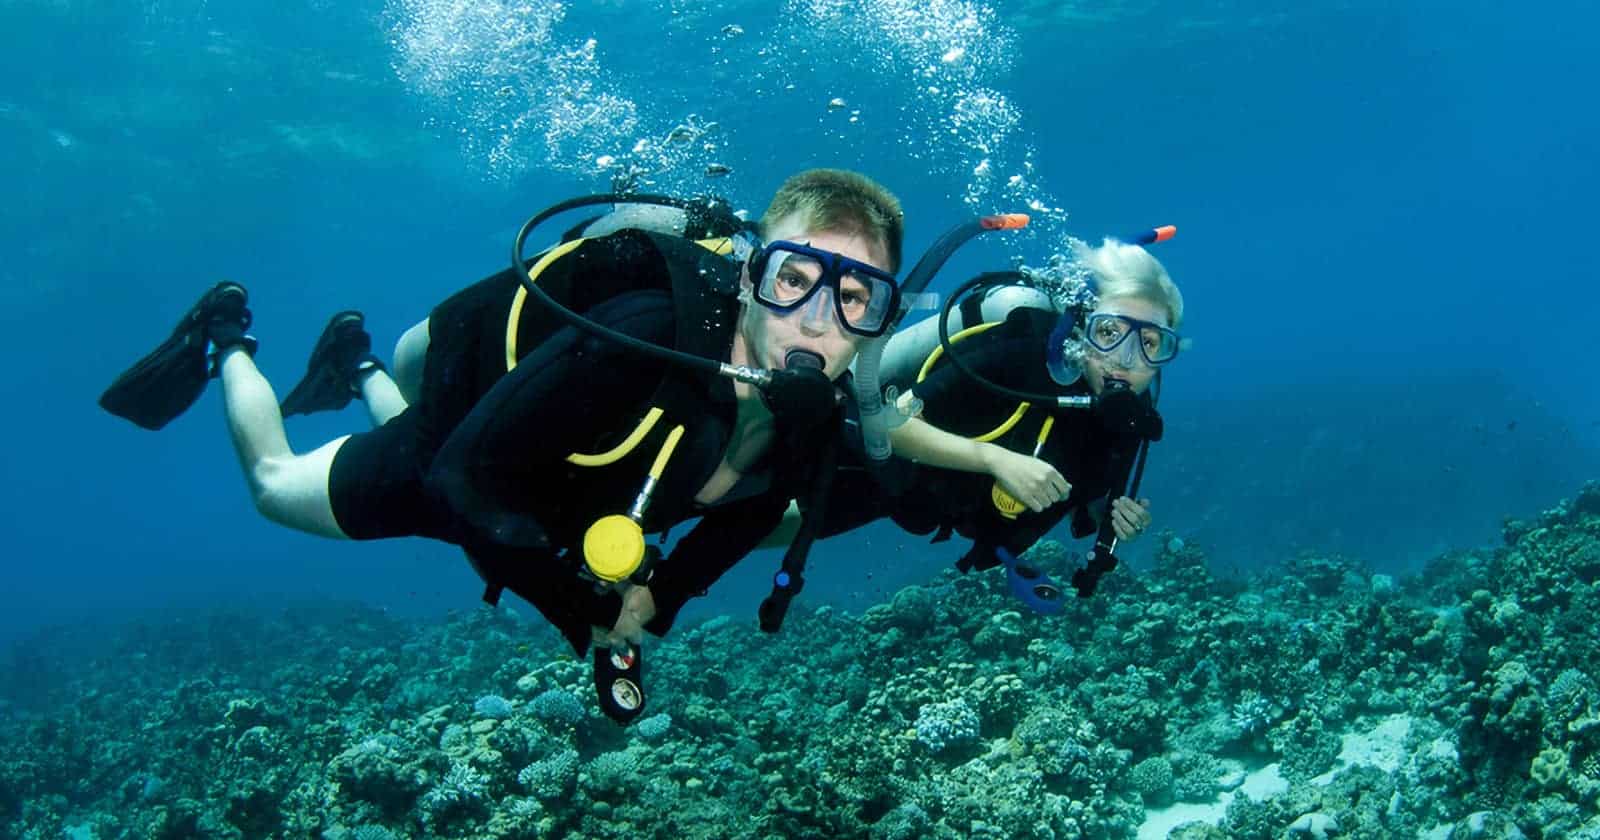 do you need to know how to swim to scuba dive